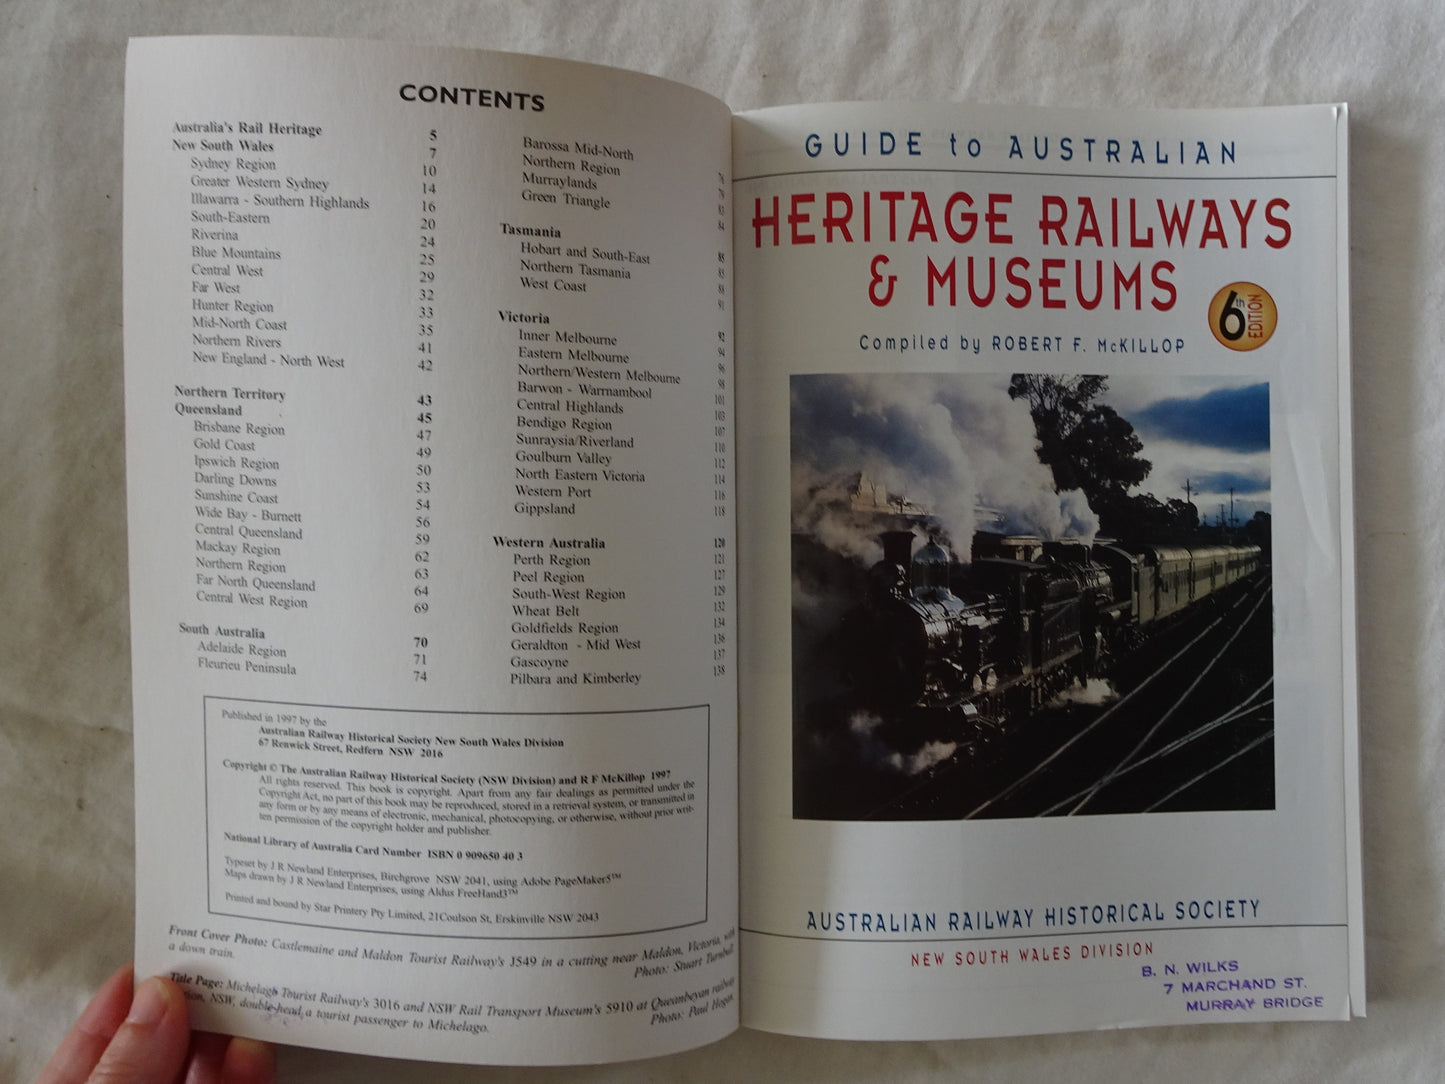 Guide to Australian Heritage Railways & Museums by Robert F. McKillop